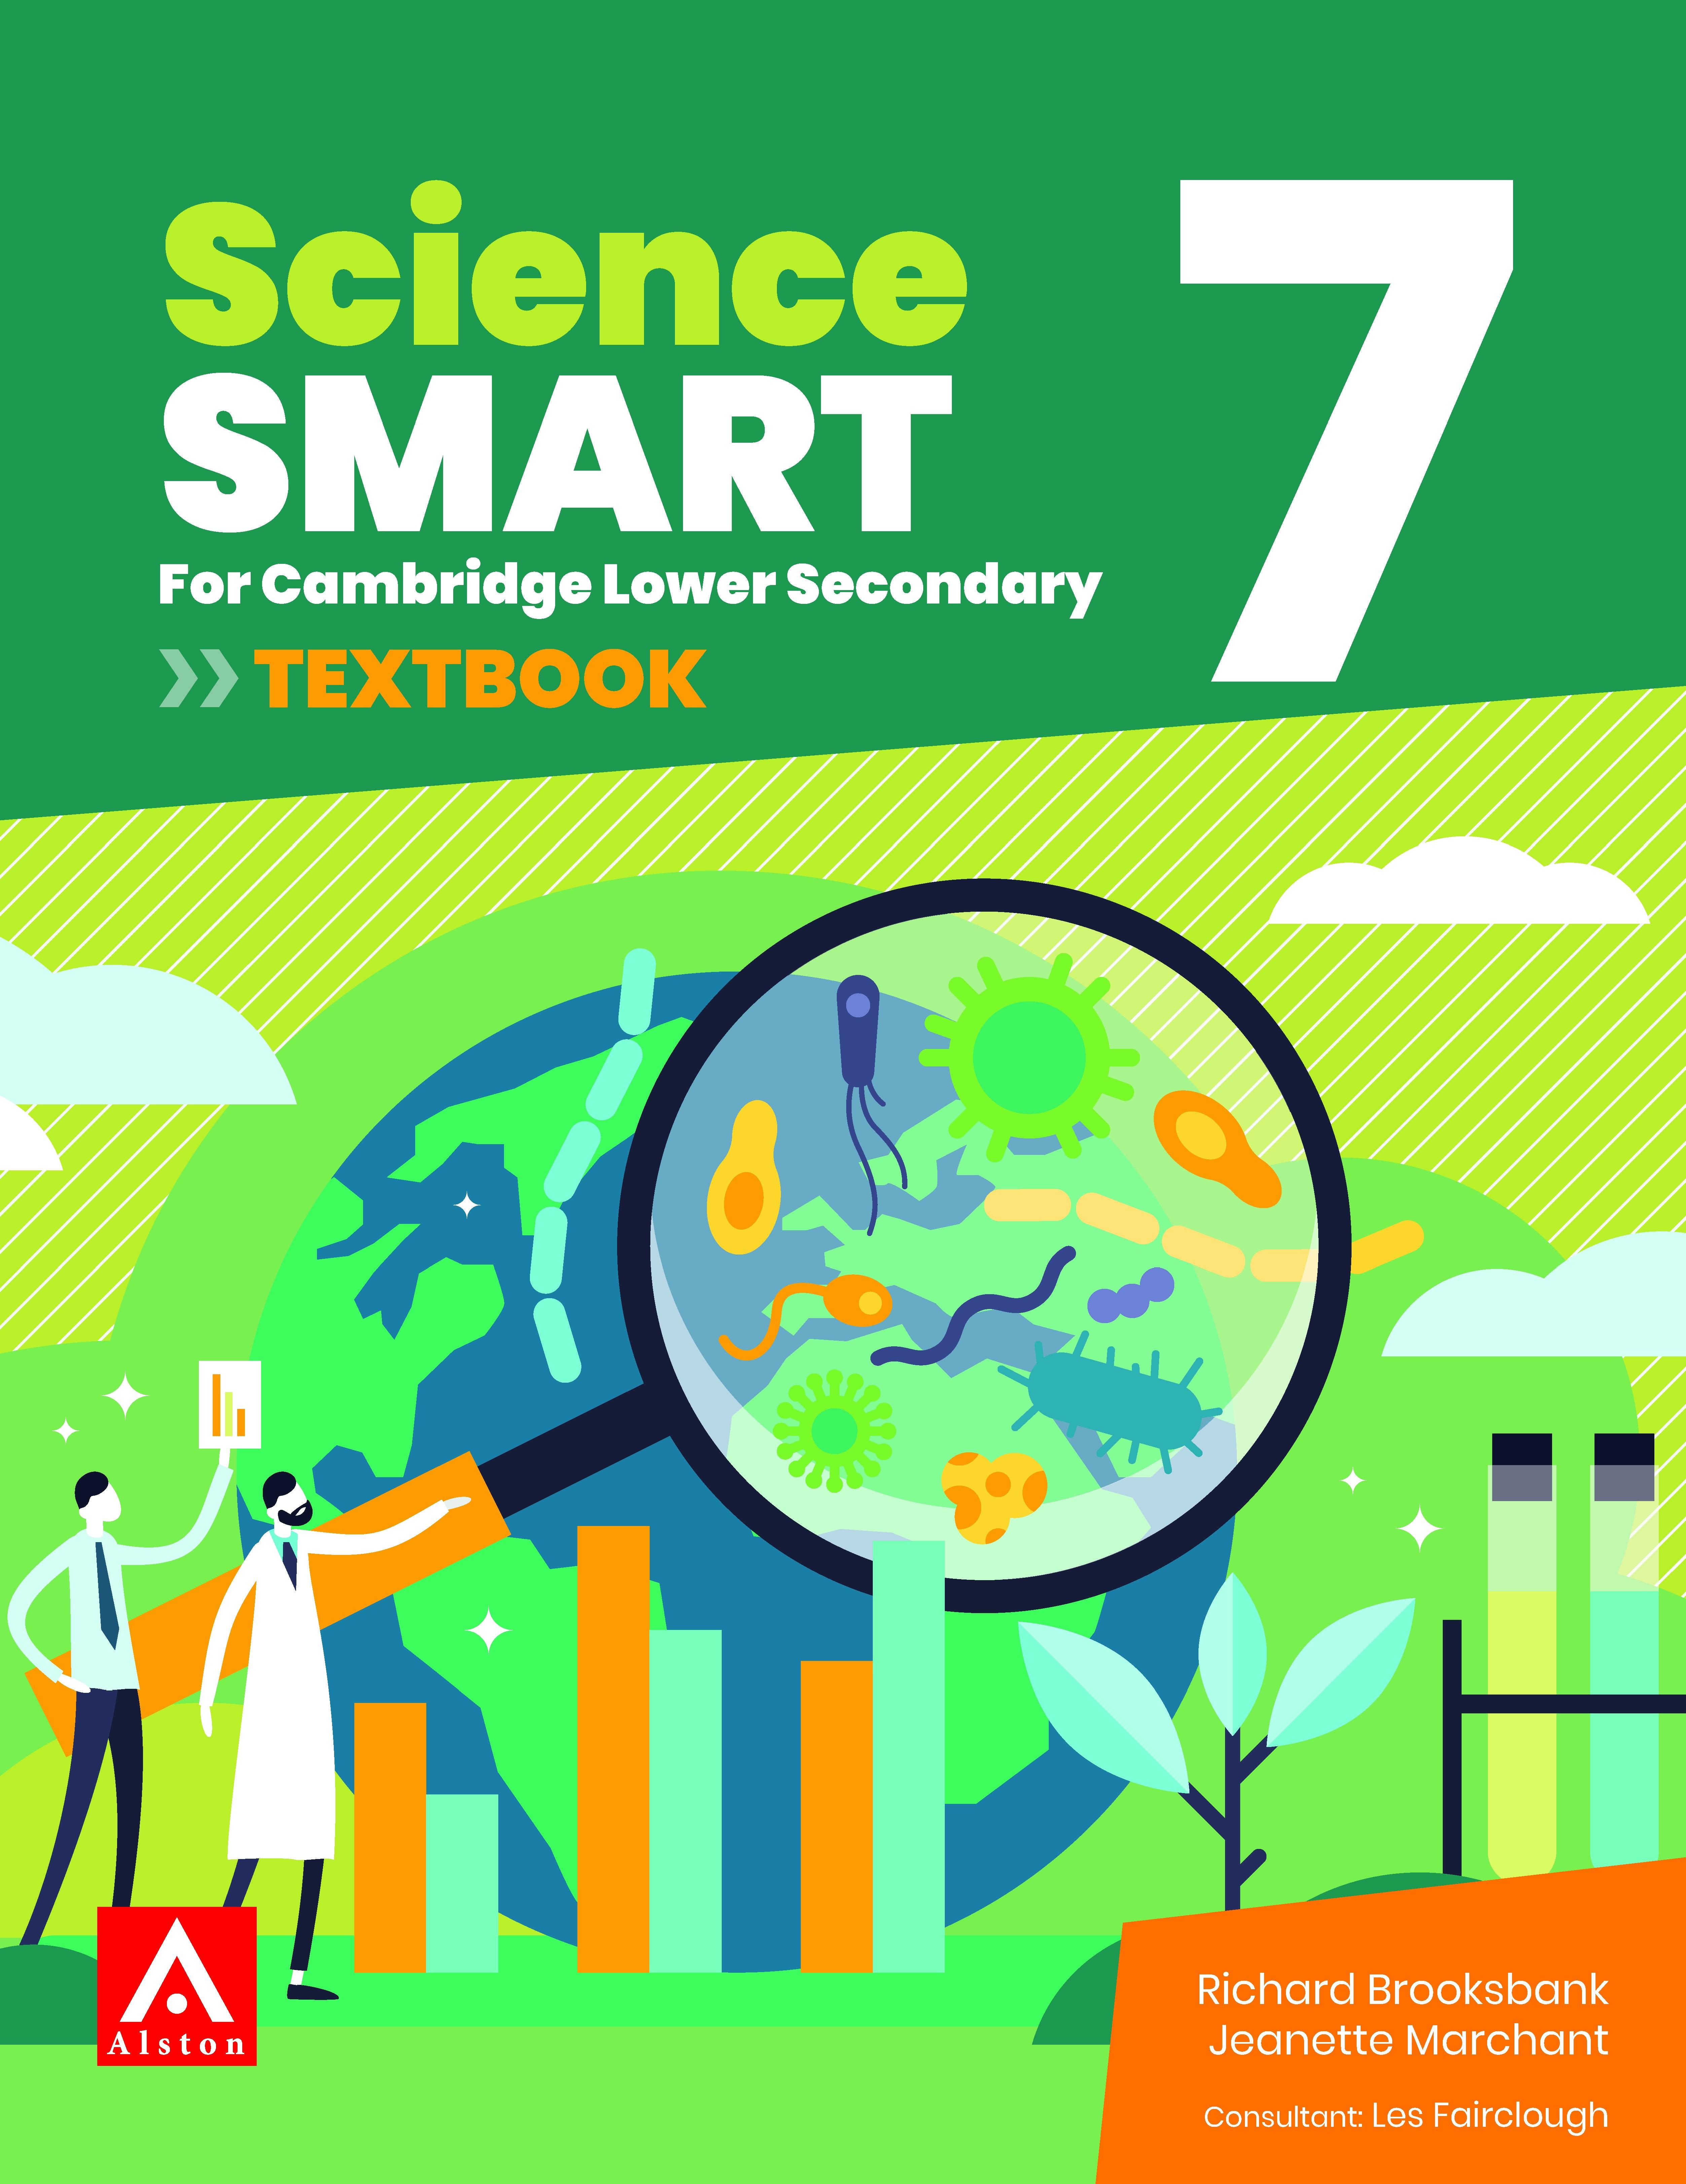 Science SMART For Cambridge Lower Secondary